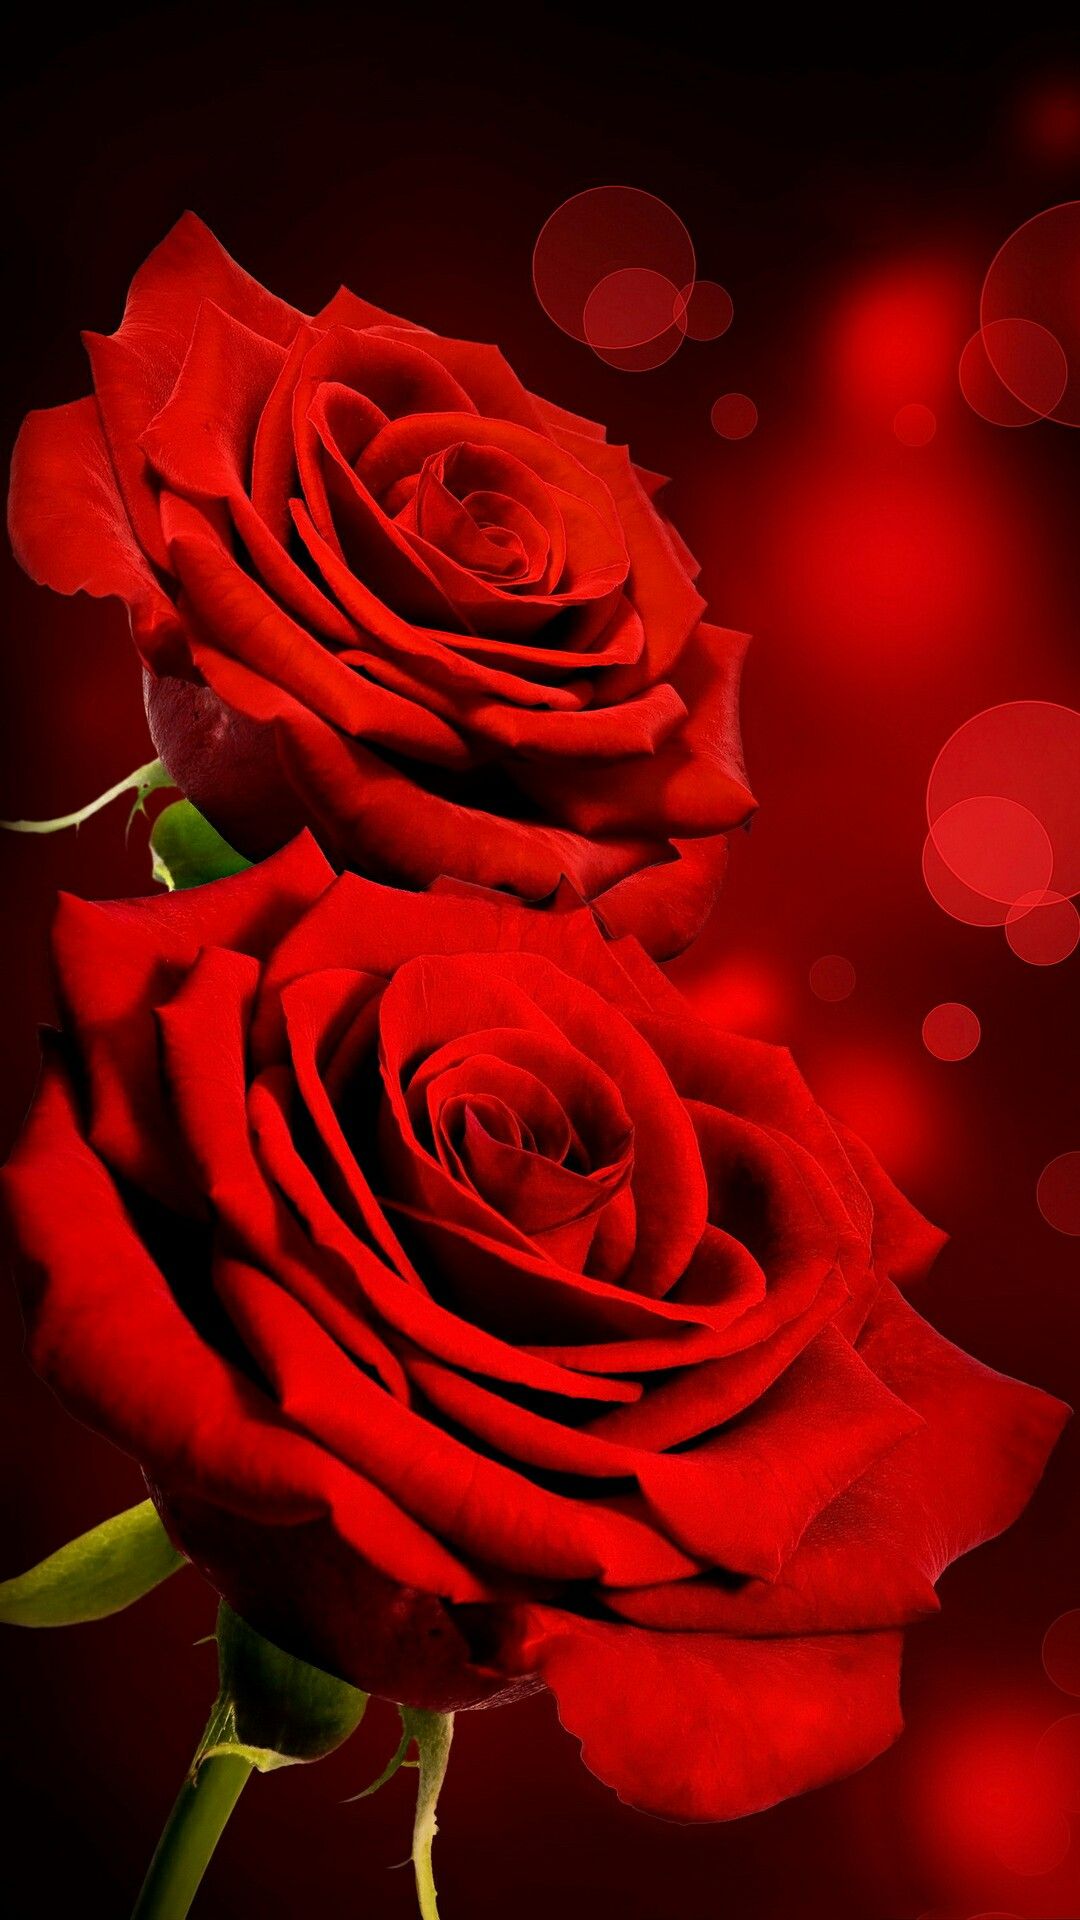 Rose Wallpaper, New Live Wallpaper, Live Wallpapers, - Red Rose , HD Wallpaper & Backgrounds